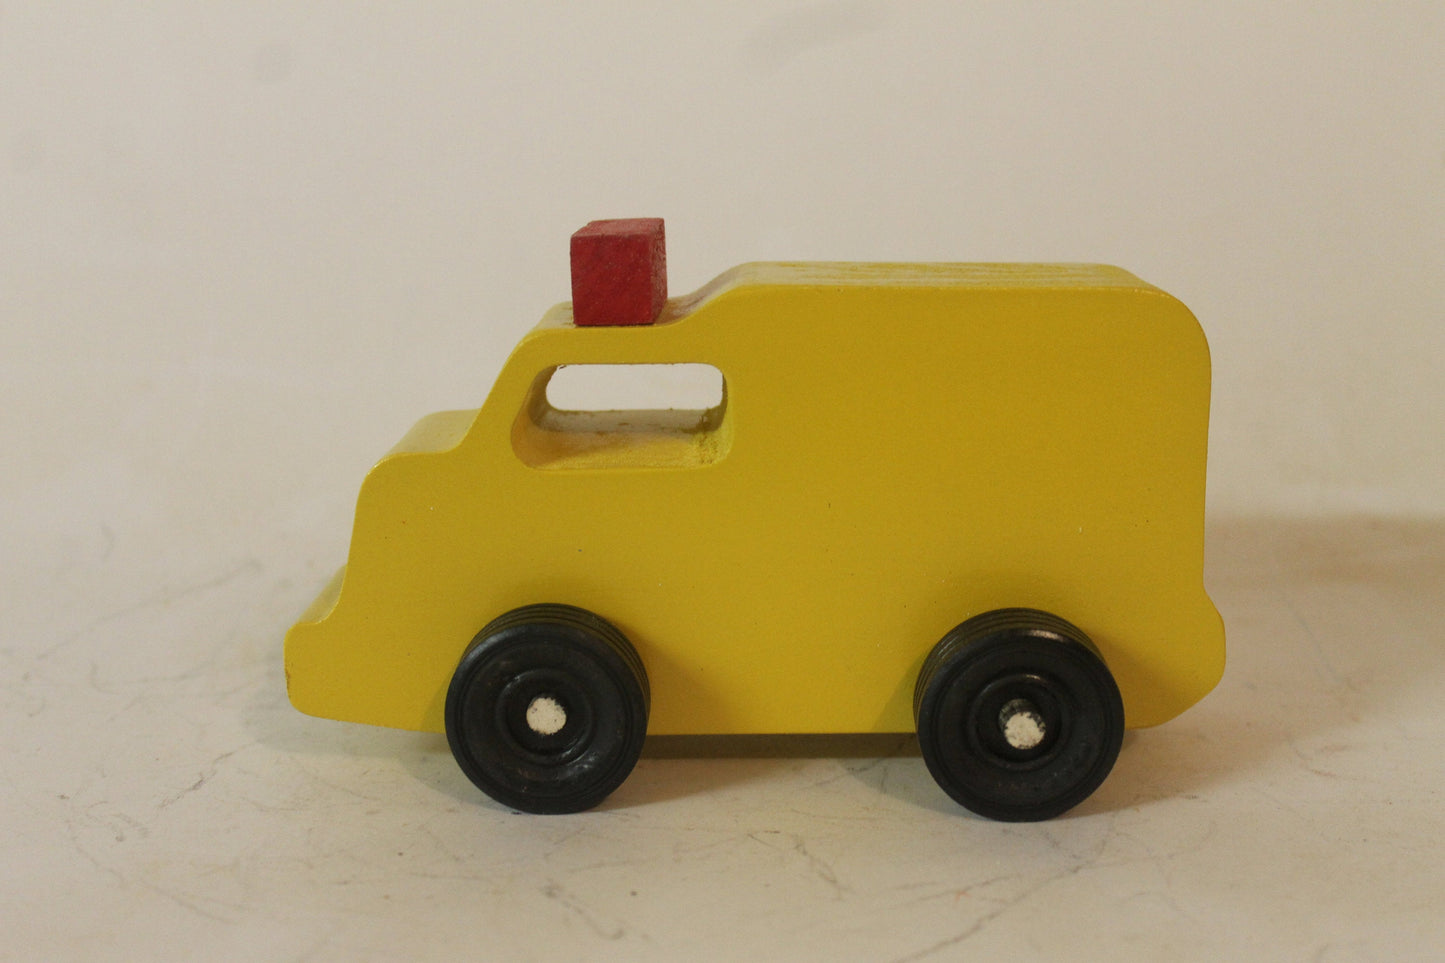 Handmade toy wooden vehicles. The set includes a tank truck, police car, ambulance, and  fire truck. Handmade from solid wood and brightly painted